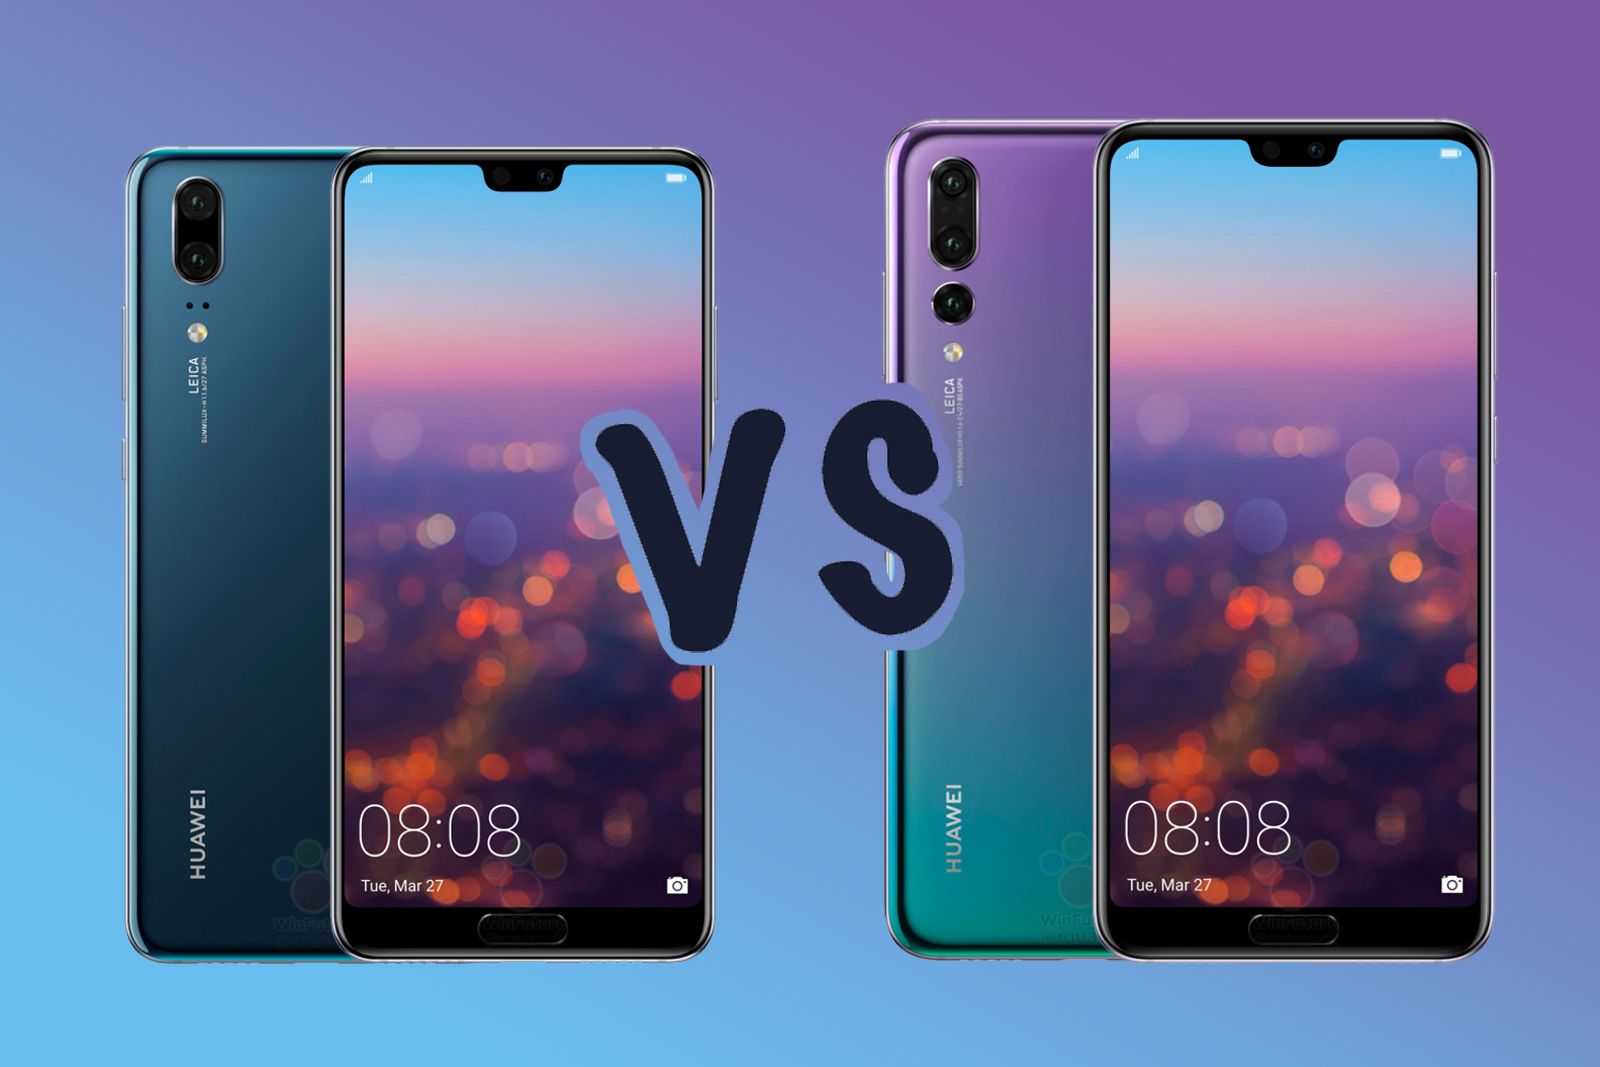 Huawei P20 vs P20 Pro: What's the difference?